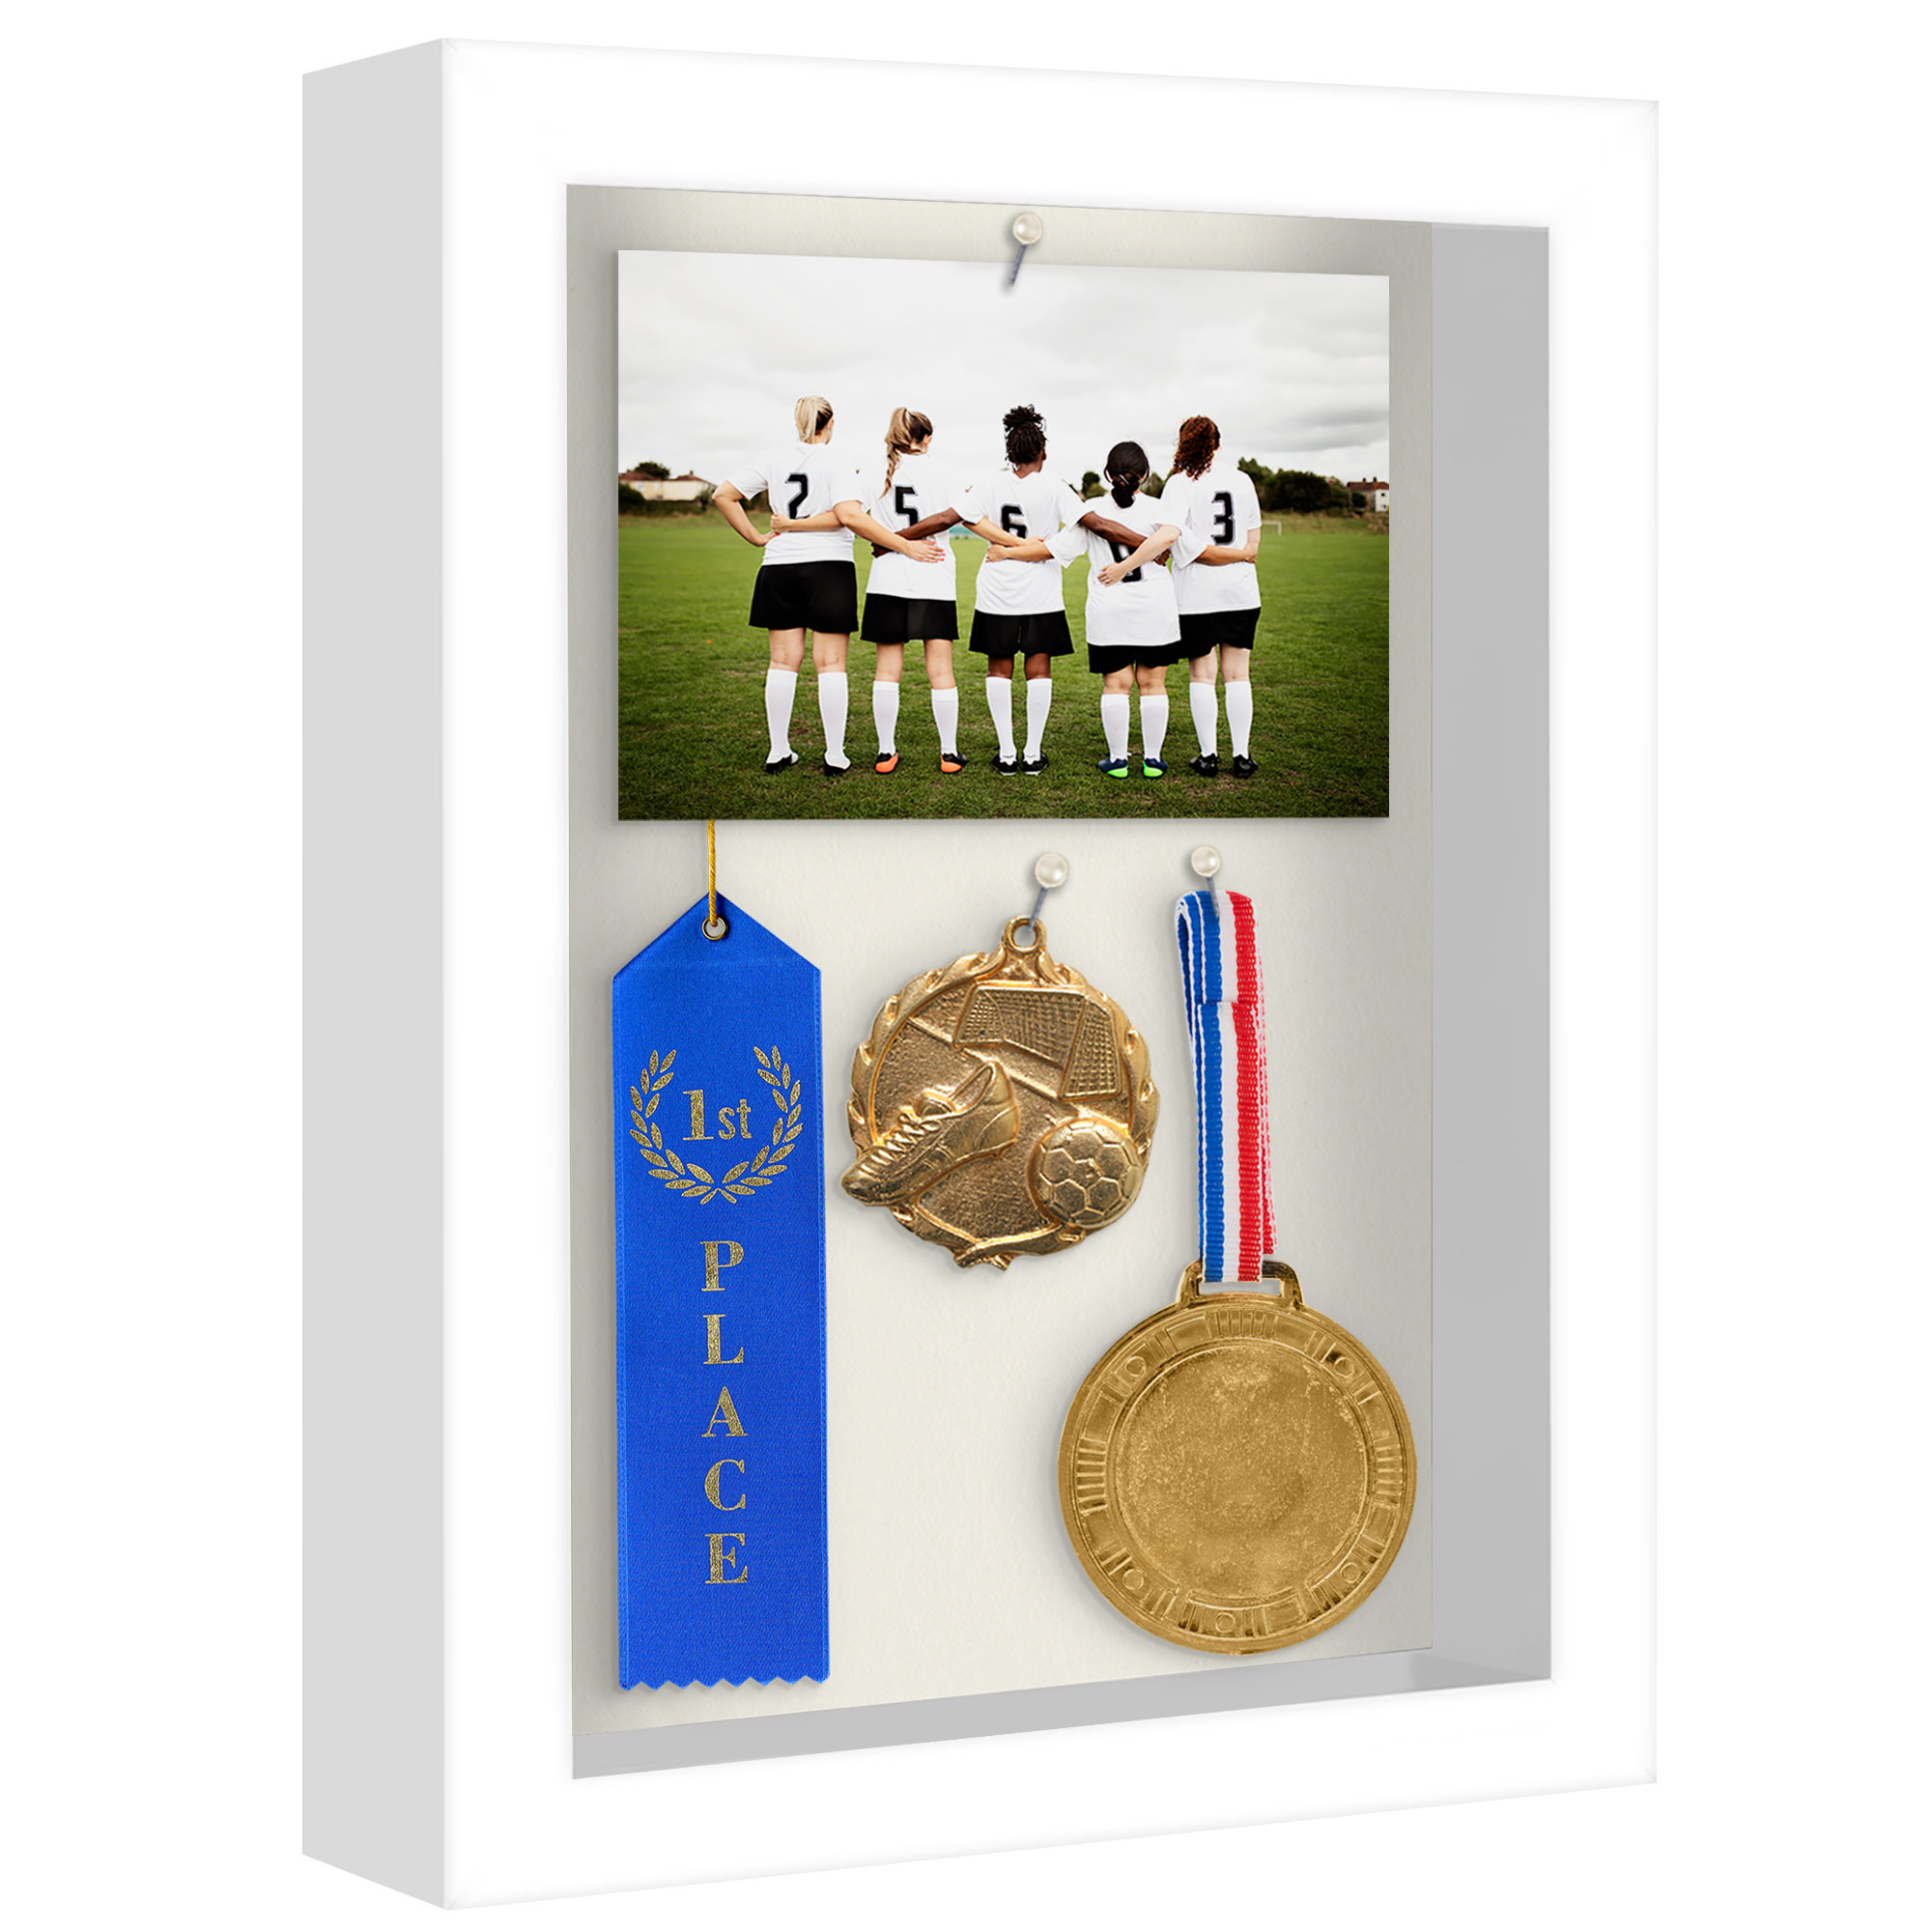  Golden State Art, 8x8 Shadow Box Frame Display Case, 2-inch  Depth, Great for Collages, Collections, Mementos, 6 Pins Included (White, 1  Pack)